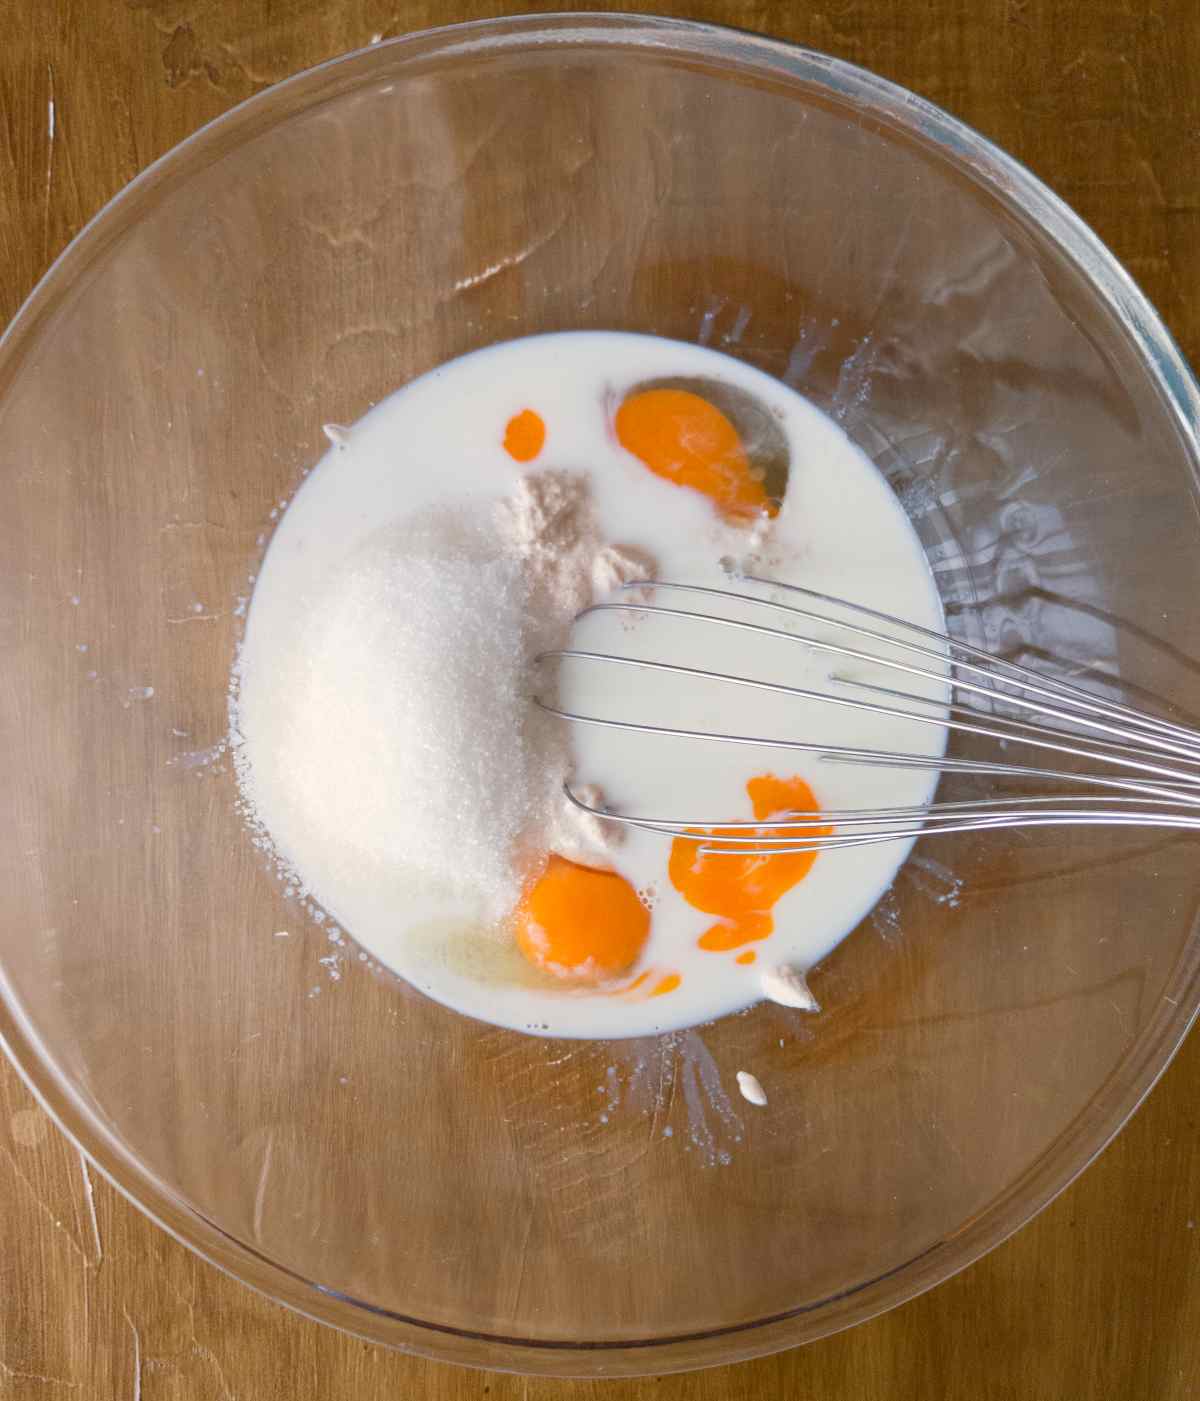 Wet ingredients combined in a large mixing bowl with a whisk.